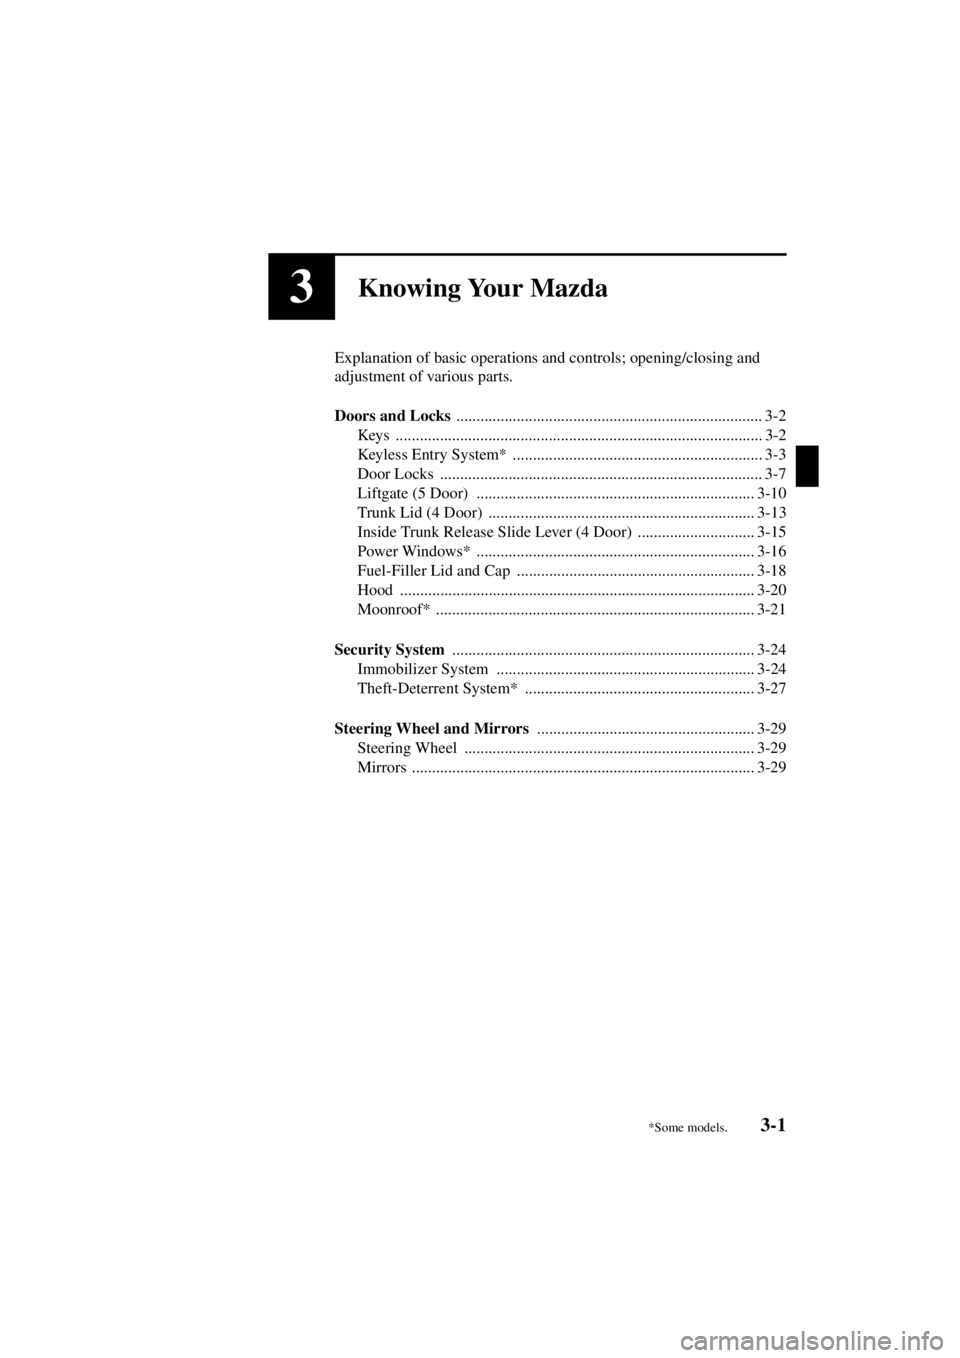 MAZDA MODEL 3 5-DOOR 2004  Owners Manual 3-1
Form No. 8S18-EA-03I
3Knowing Your Mazda
Explanation of basic operations and controls; opening/closing and 
adjustment of various parts.
Doors and Locks ...........................................